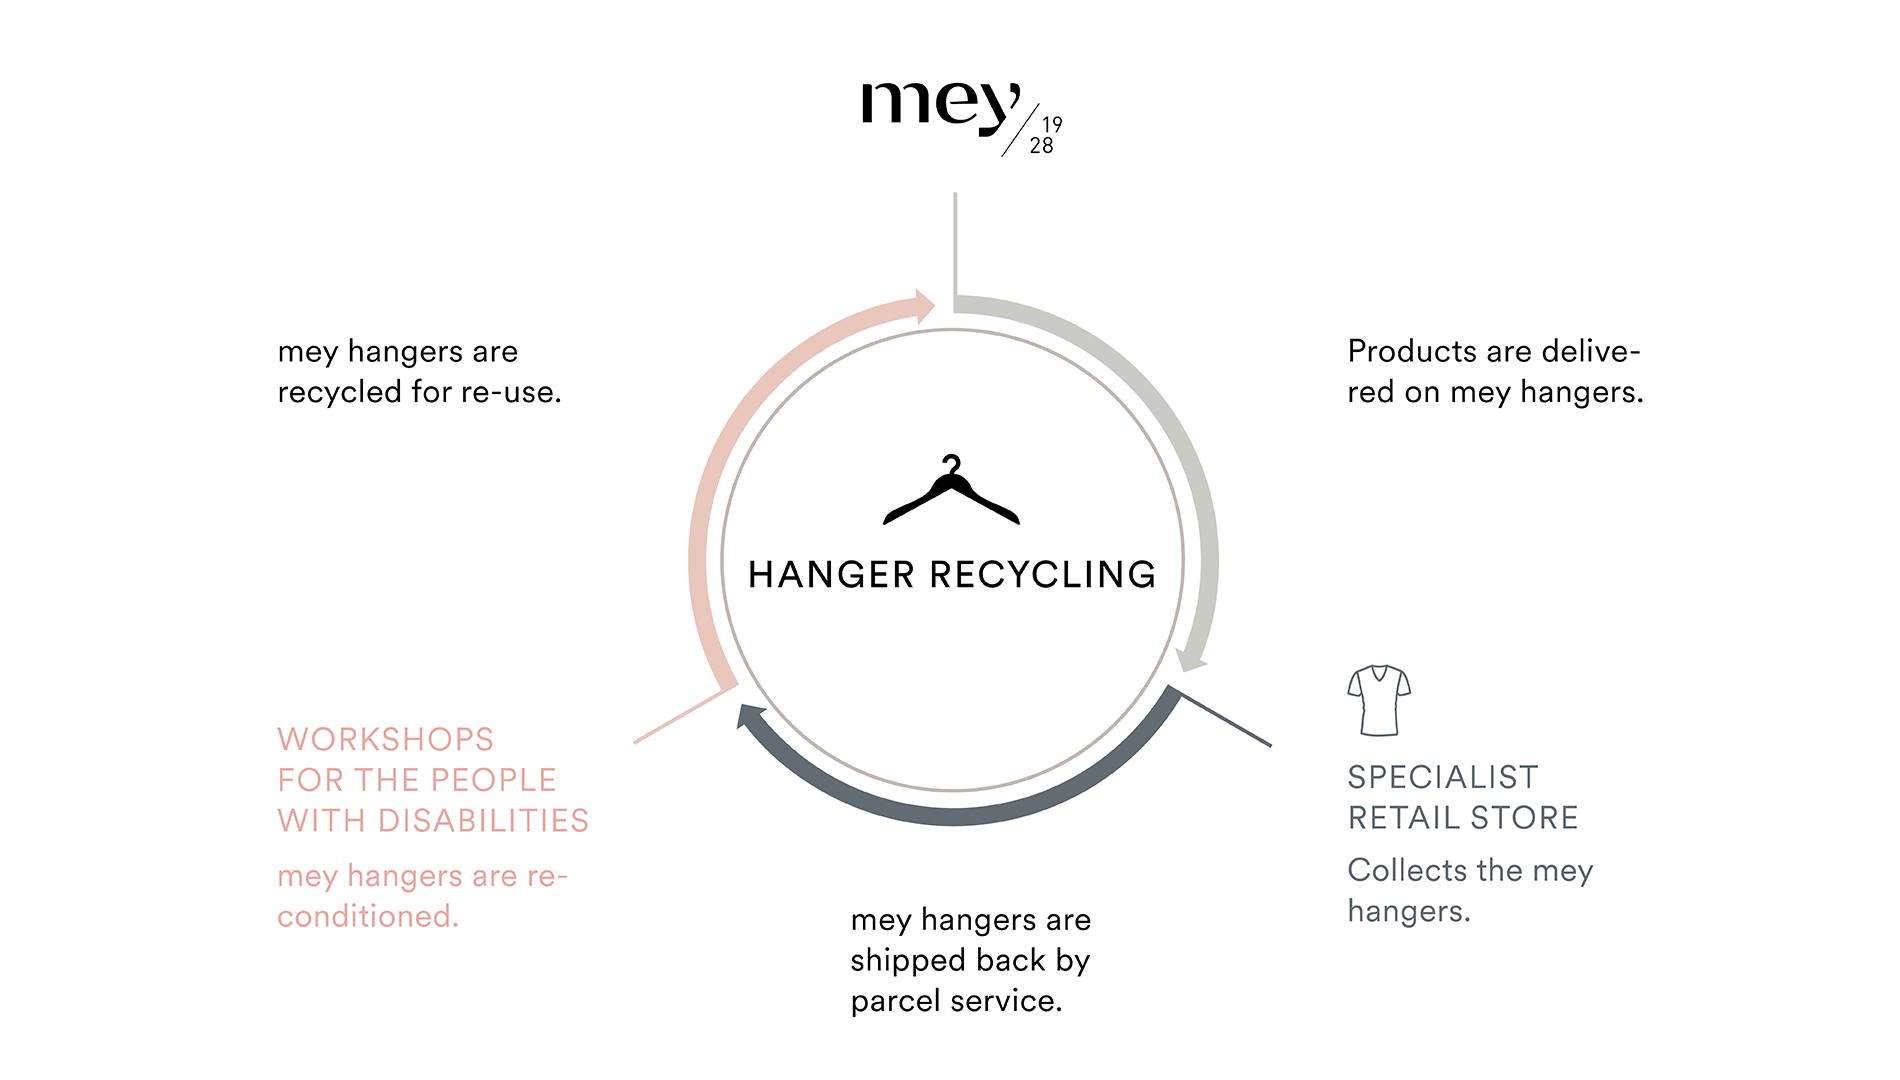 hanger cycle, the “Swabian boomerang”, graphic shows the sequence of processes from delivery to retailers, return and re-processing, to reuse | mey®